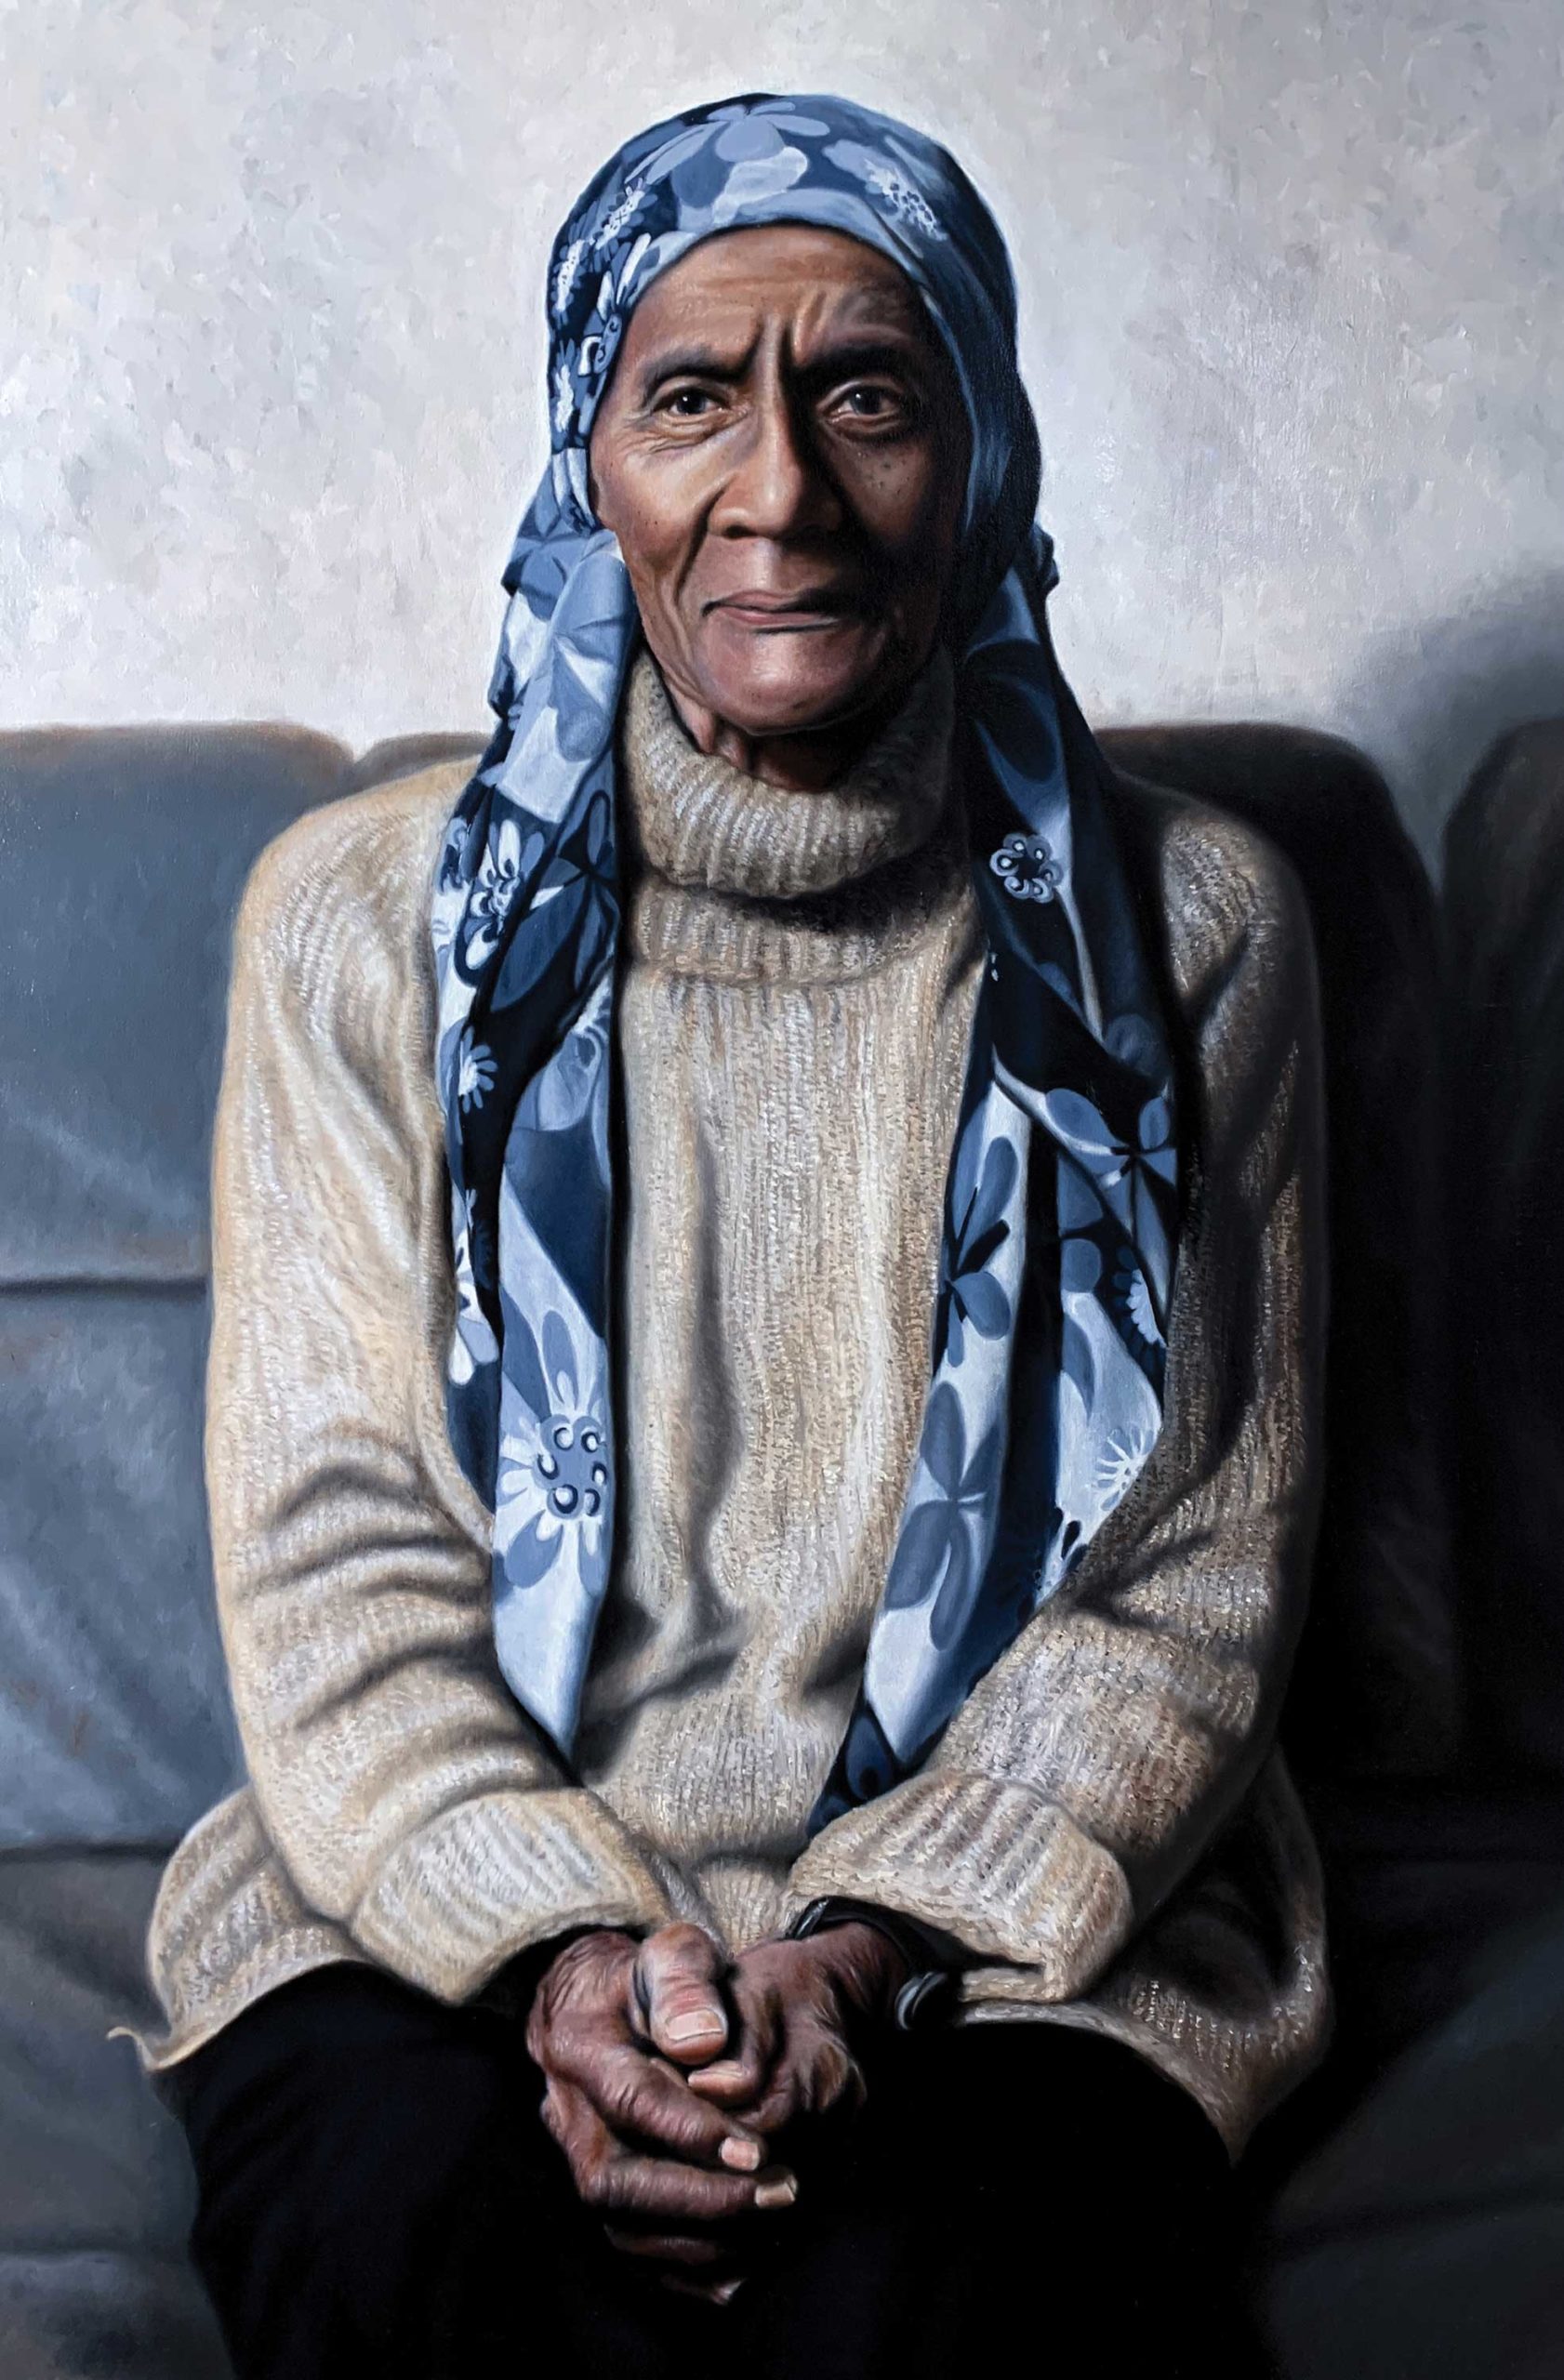 contemporary realism portrait paintings - O'Neil Scott (b. 1982), "Ummi," 2019, oil on panel, 36 x 24 in., private collection